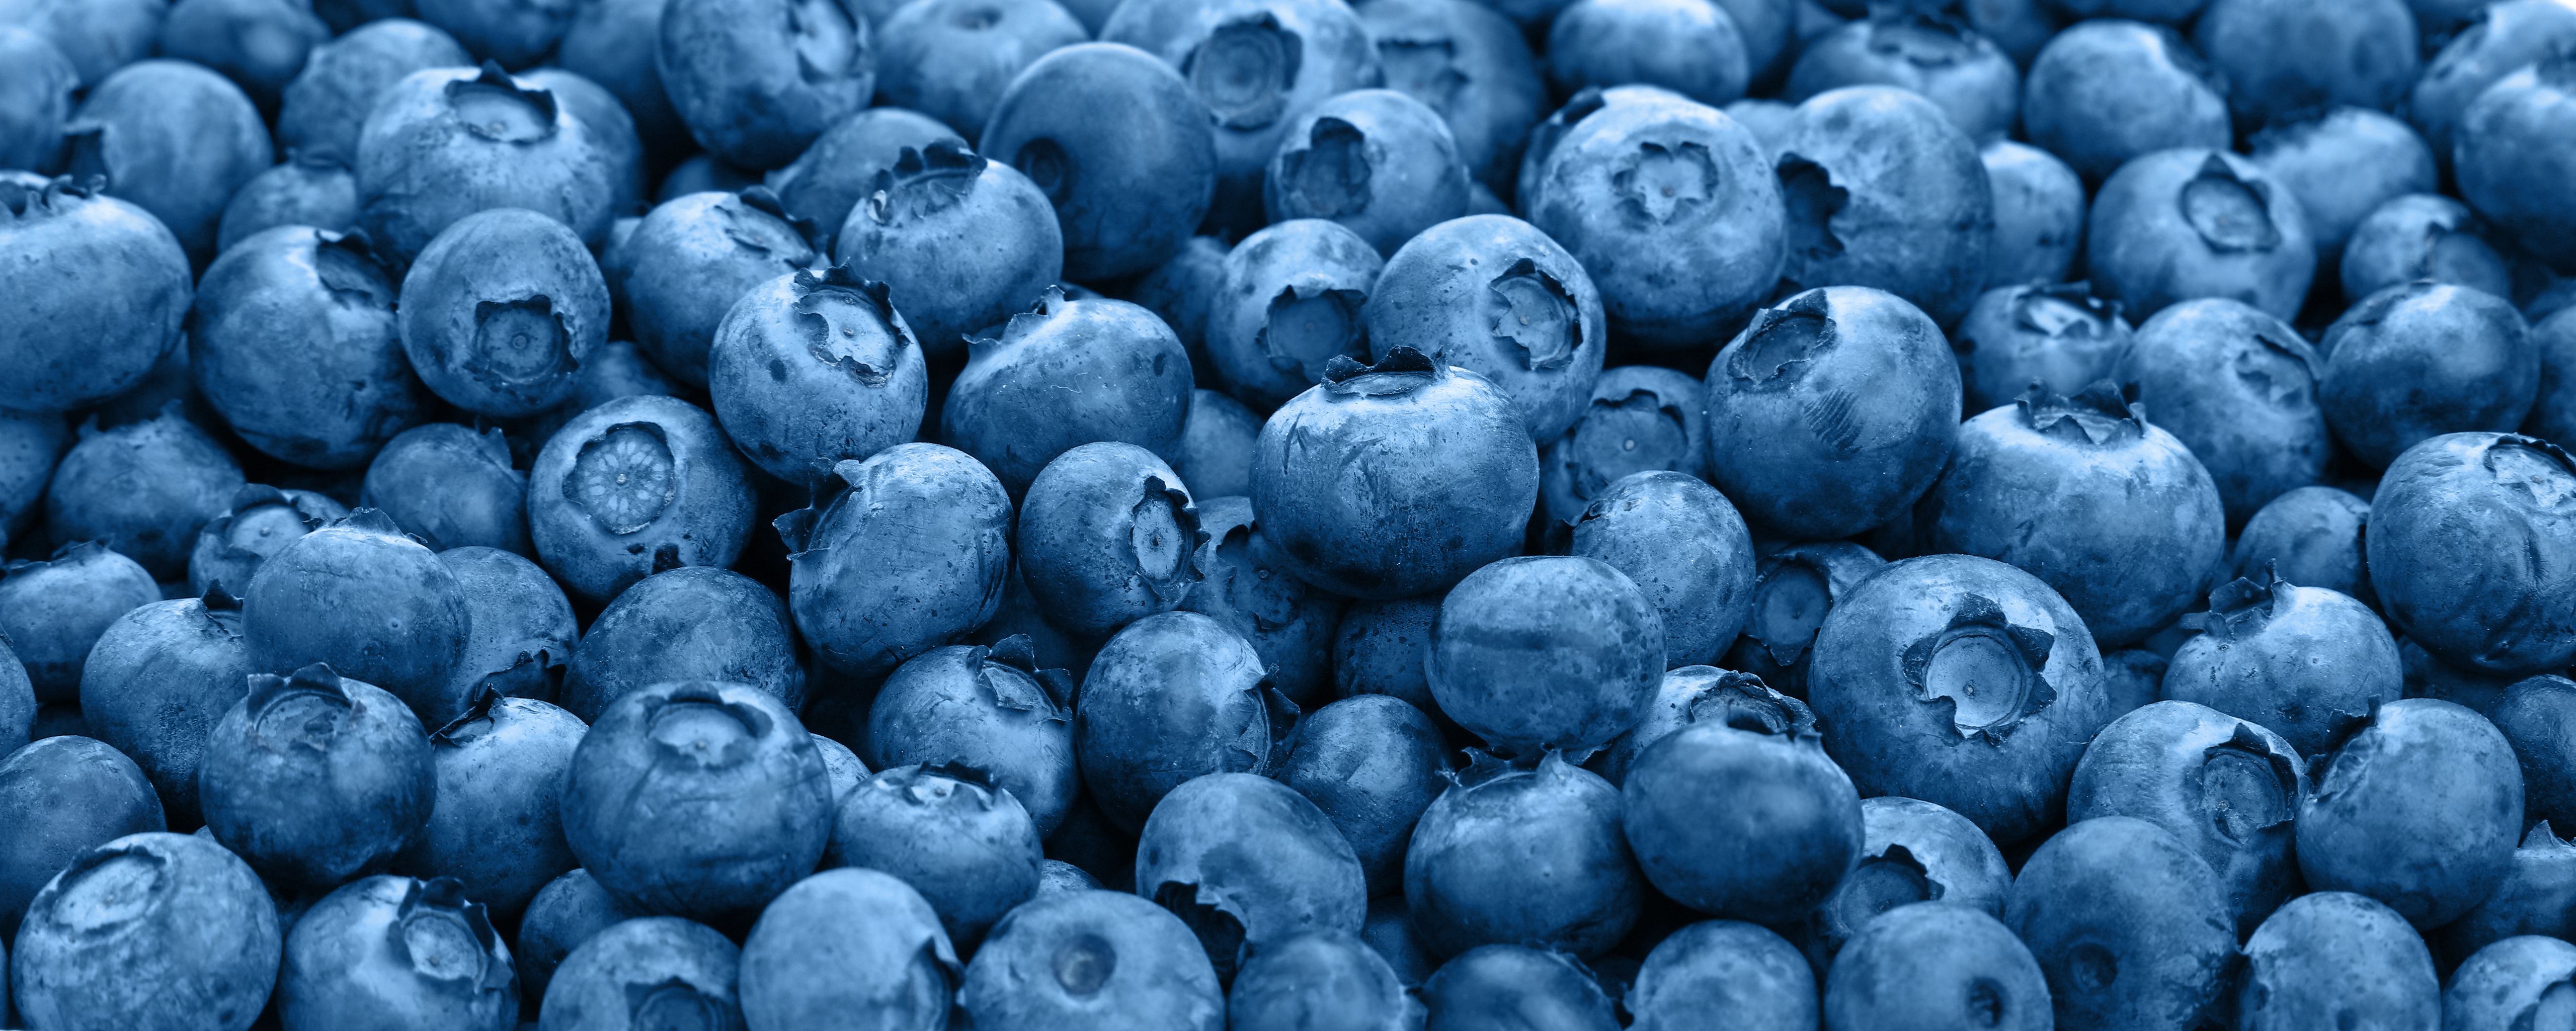 Detail Picture Of Blueberries Nomer 37